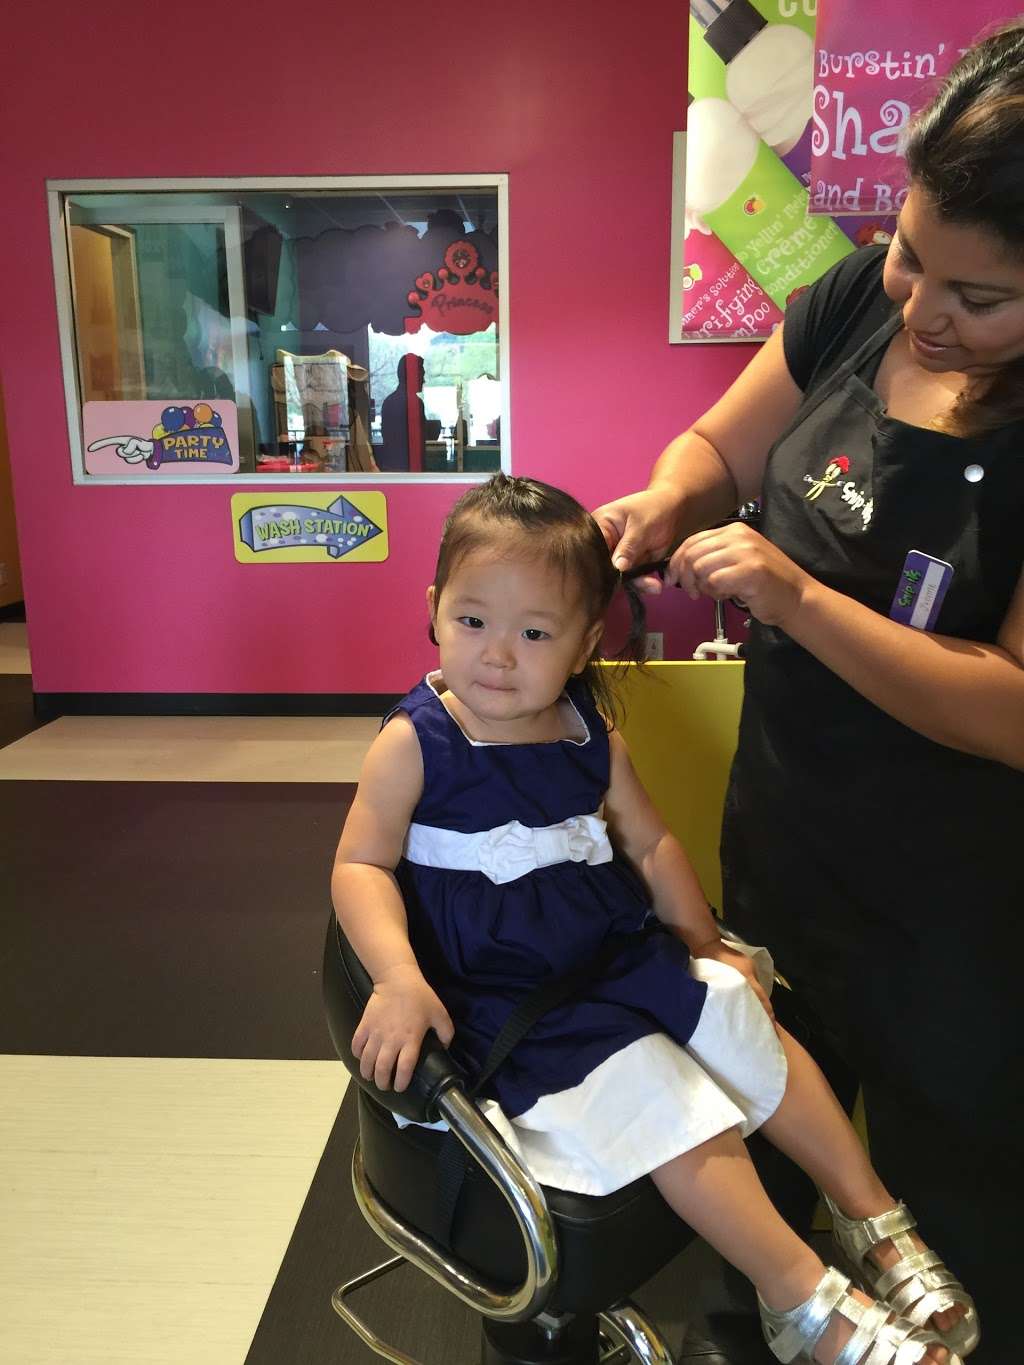 Snip-its Haircuts for Kids - hair care  | Photo 5 of 9 | Address: 182 W Foothill Blvd, Monrovia, CA 91016, USA | Phone: (626) 239-7442